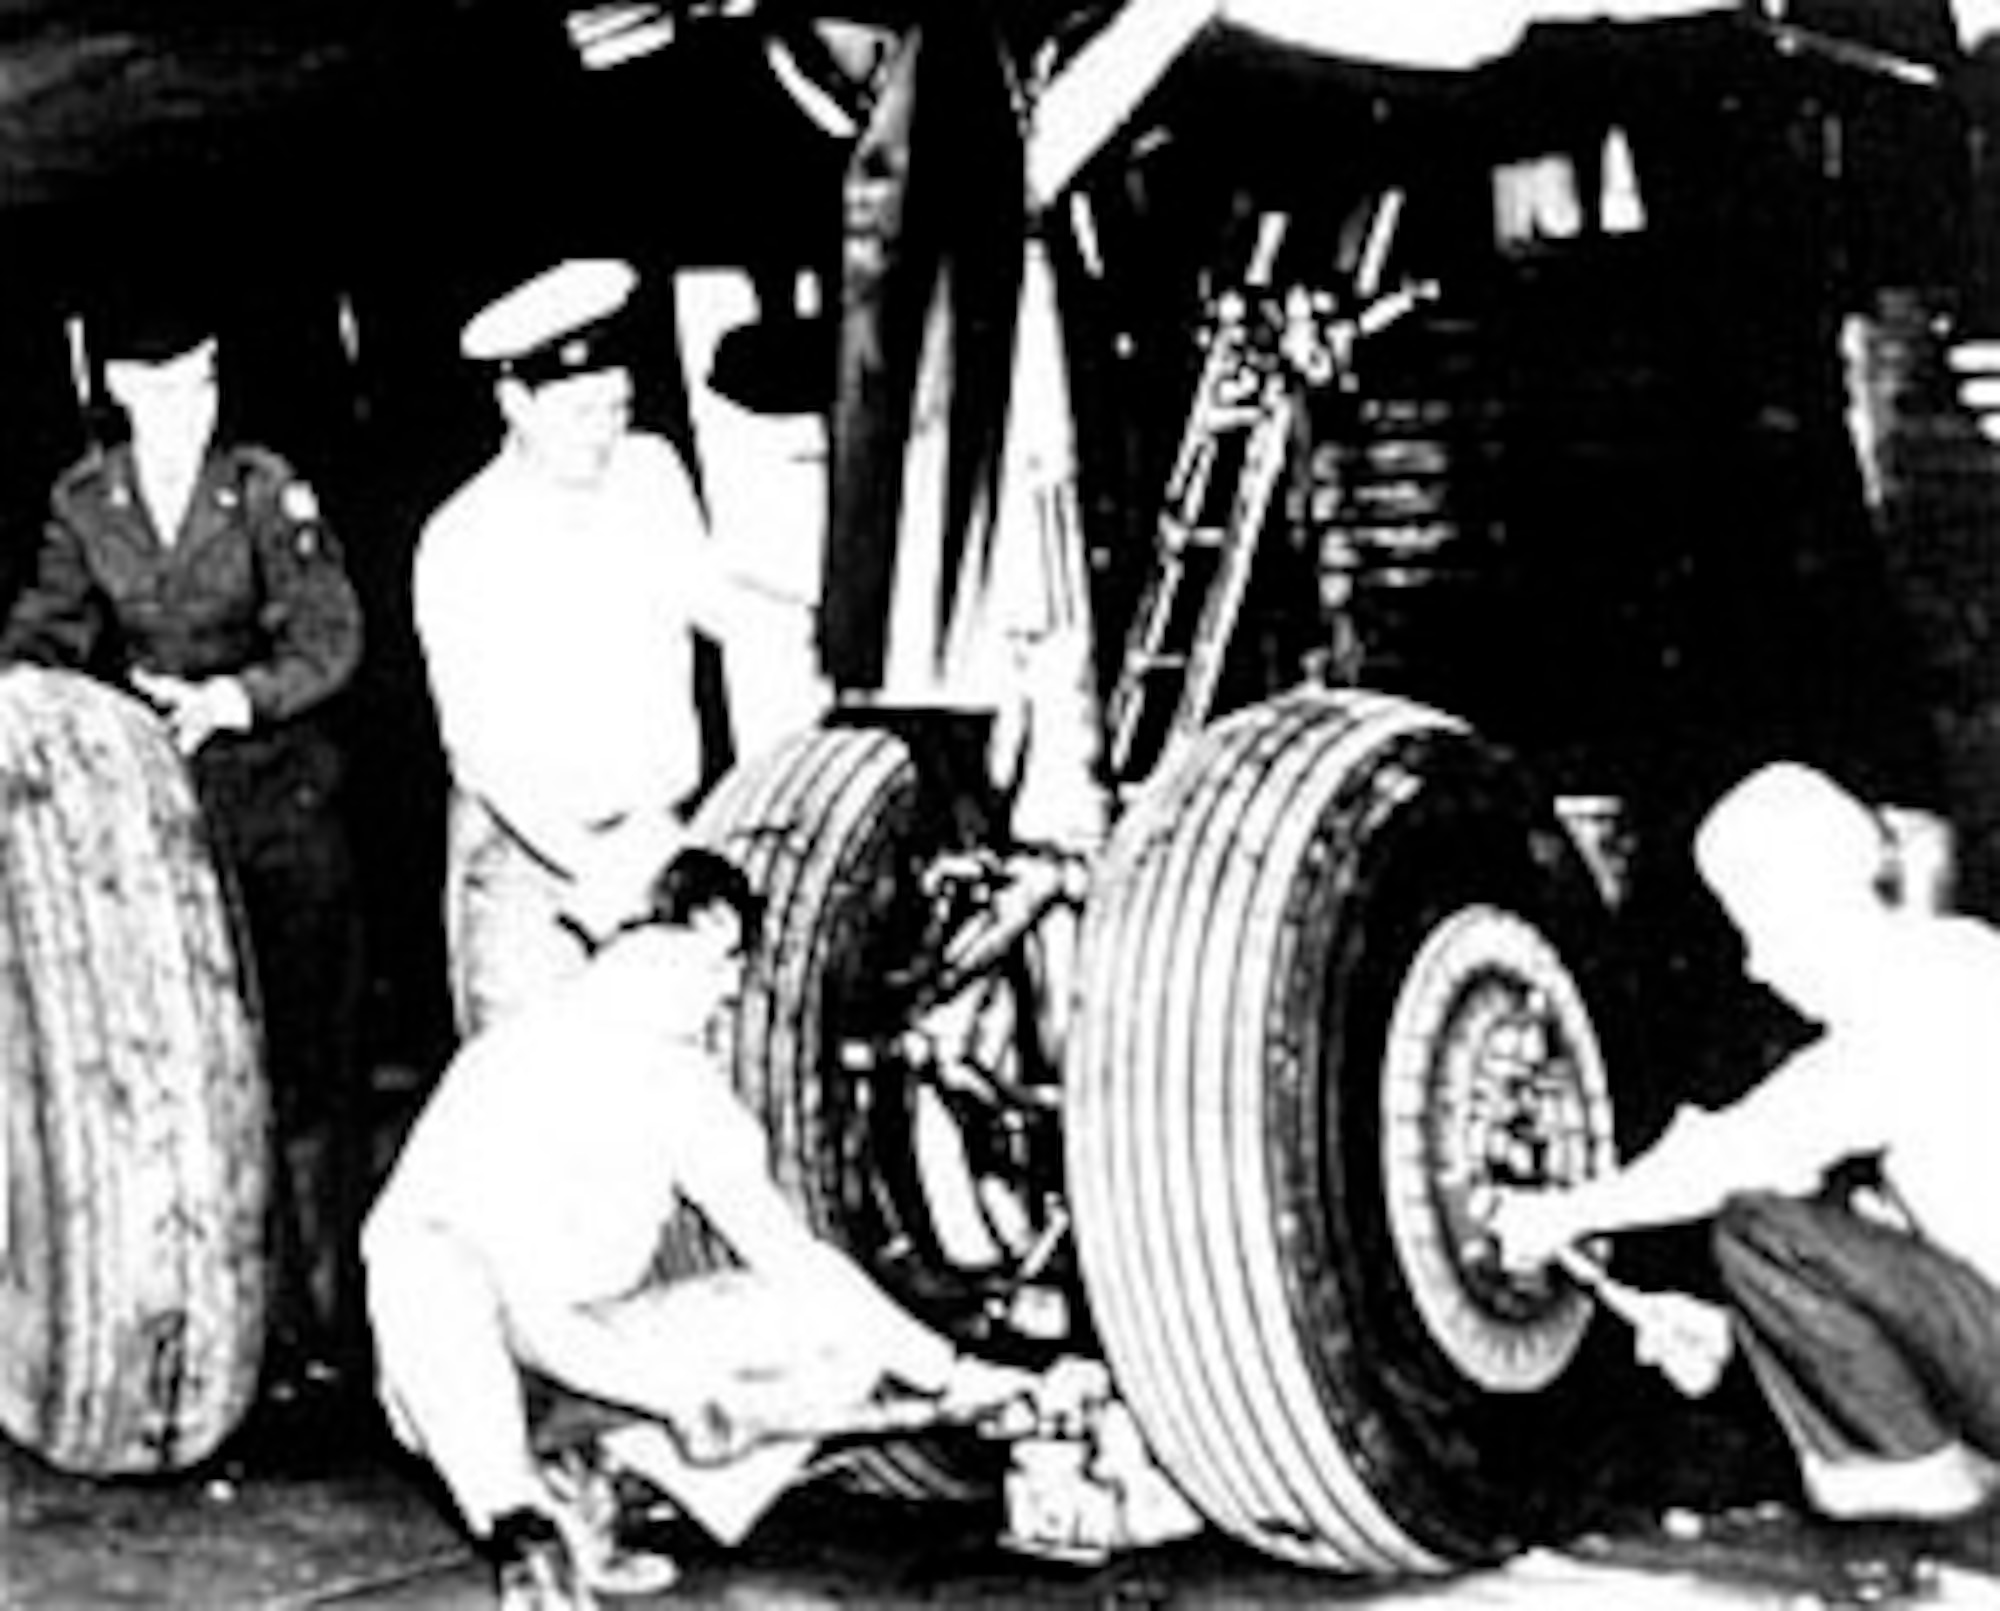 U.S. Navy support personnel from VR-6, assisted by an Air Force enlisted man, change a tire on a Navy R-5D (C-54). (U.S. Air Force photo)